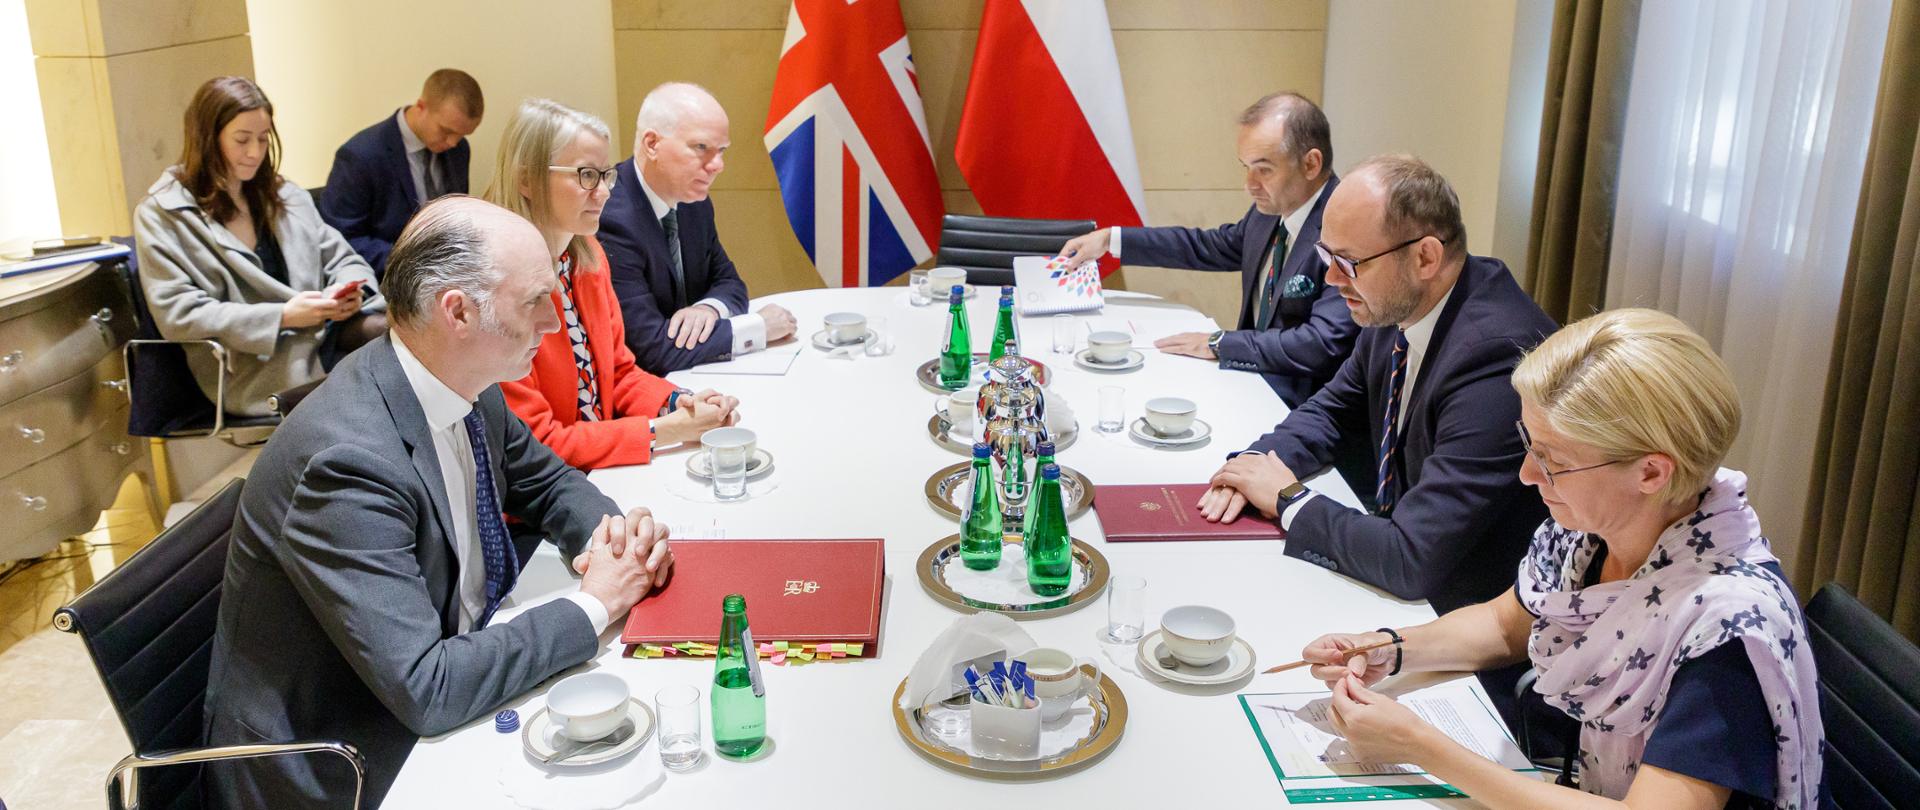 Meeting of deputy foreign ministers of Poland, Ukraine and UK